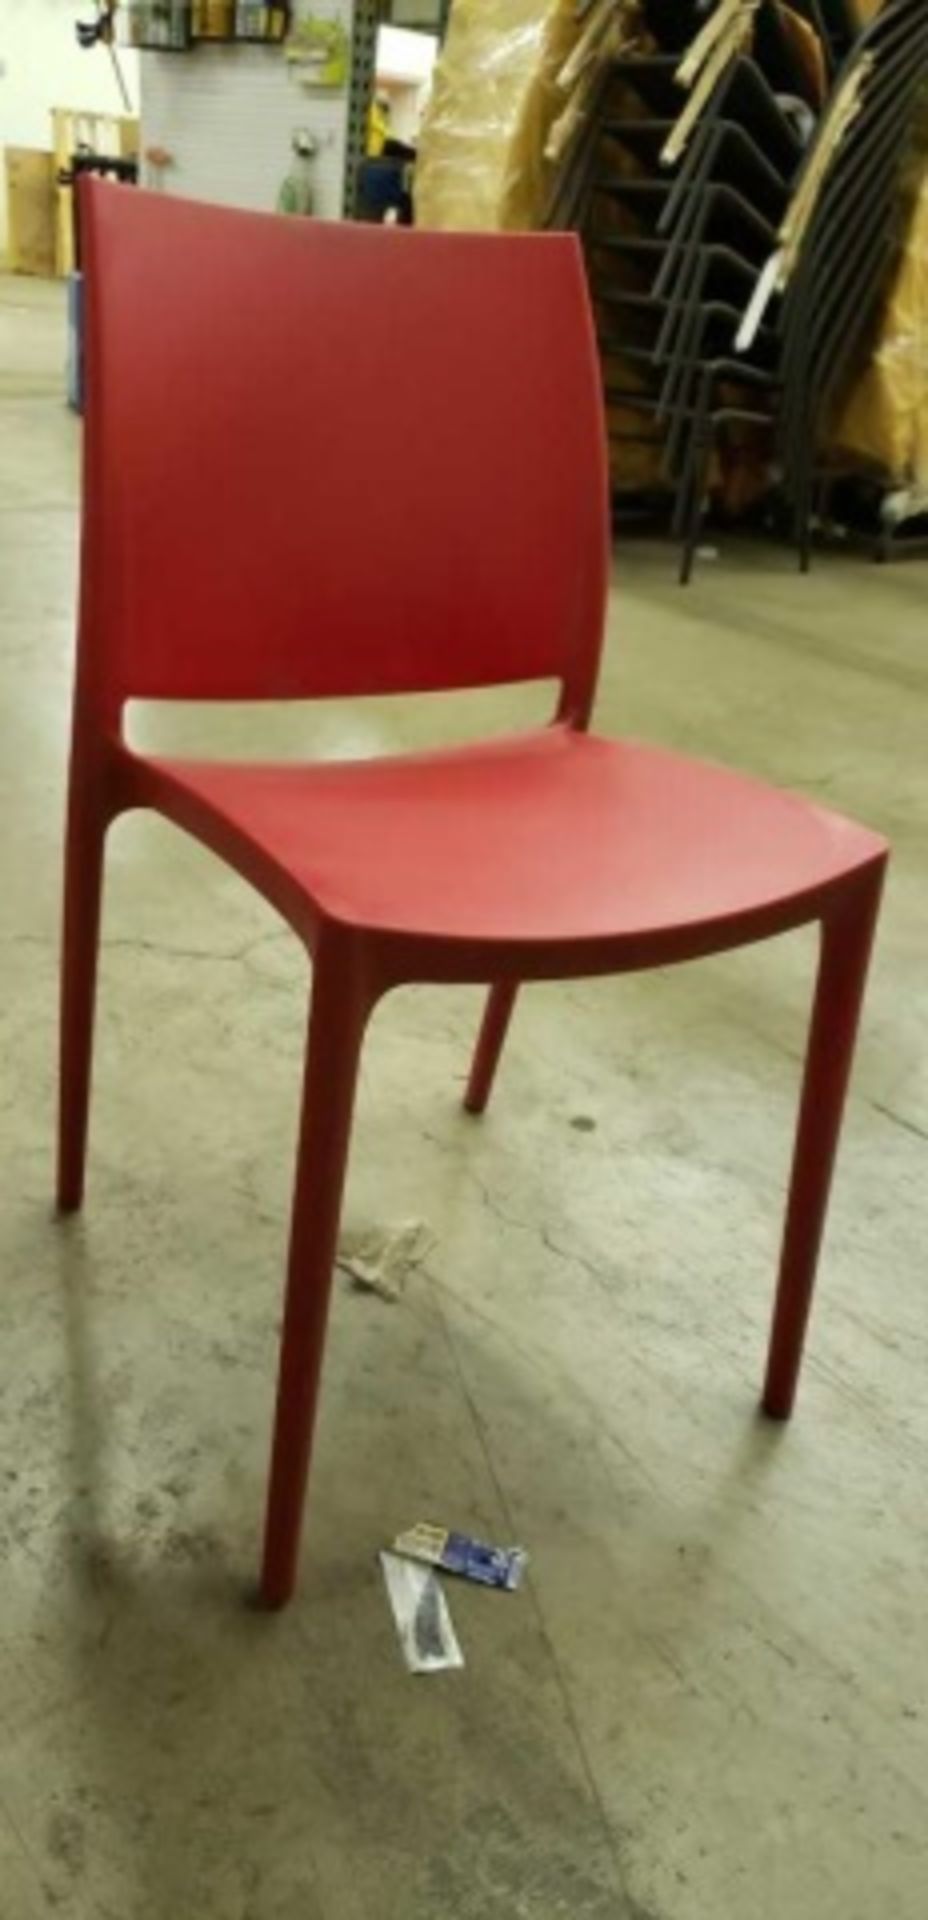 Martinique side chair - red, 8 boxes with 4 each, 32 total. - Image 3 of 5